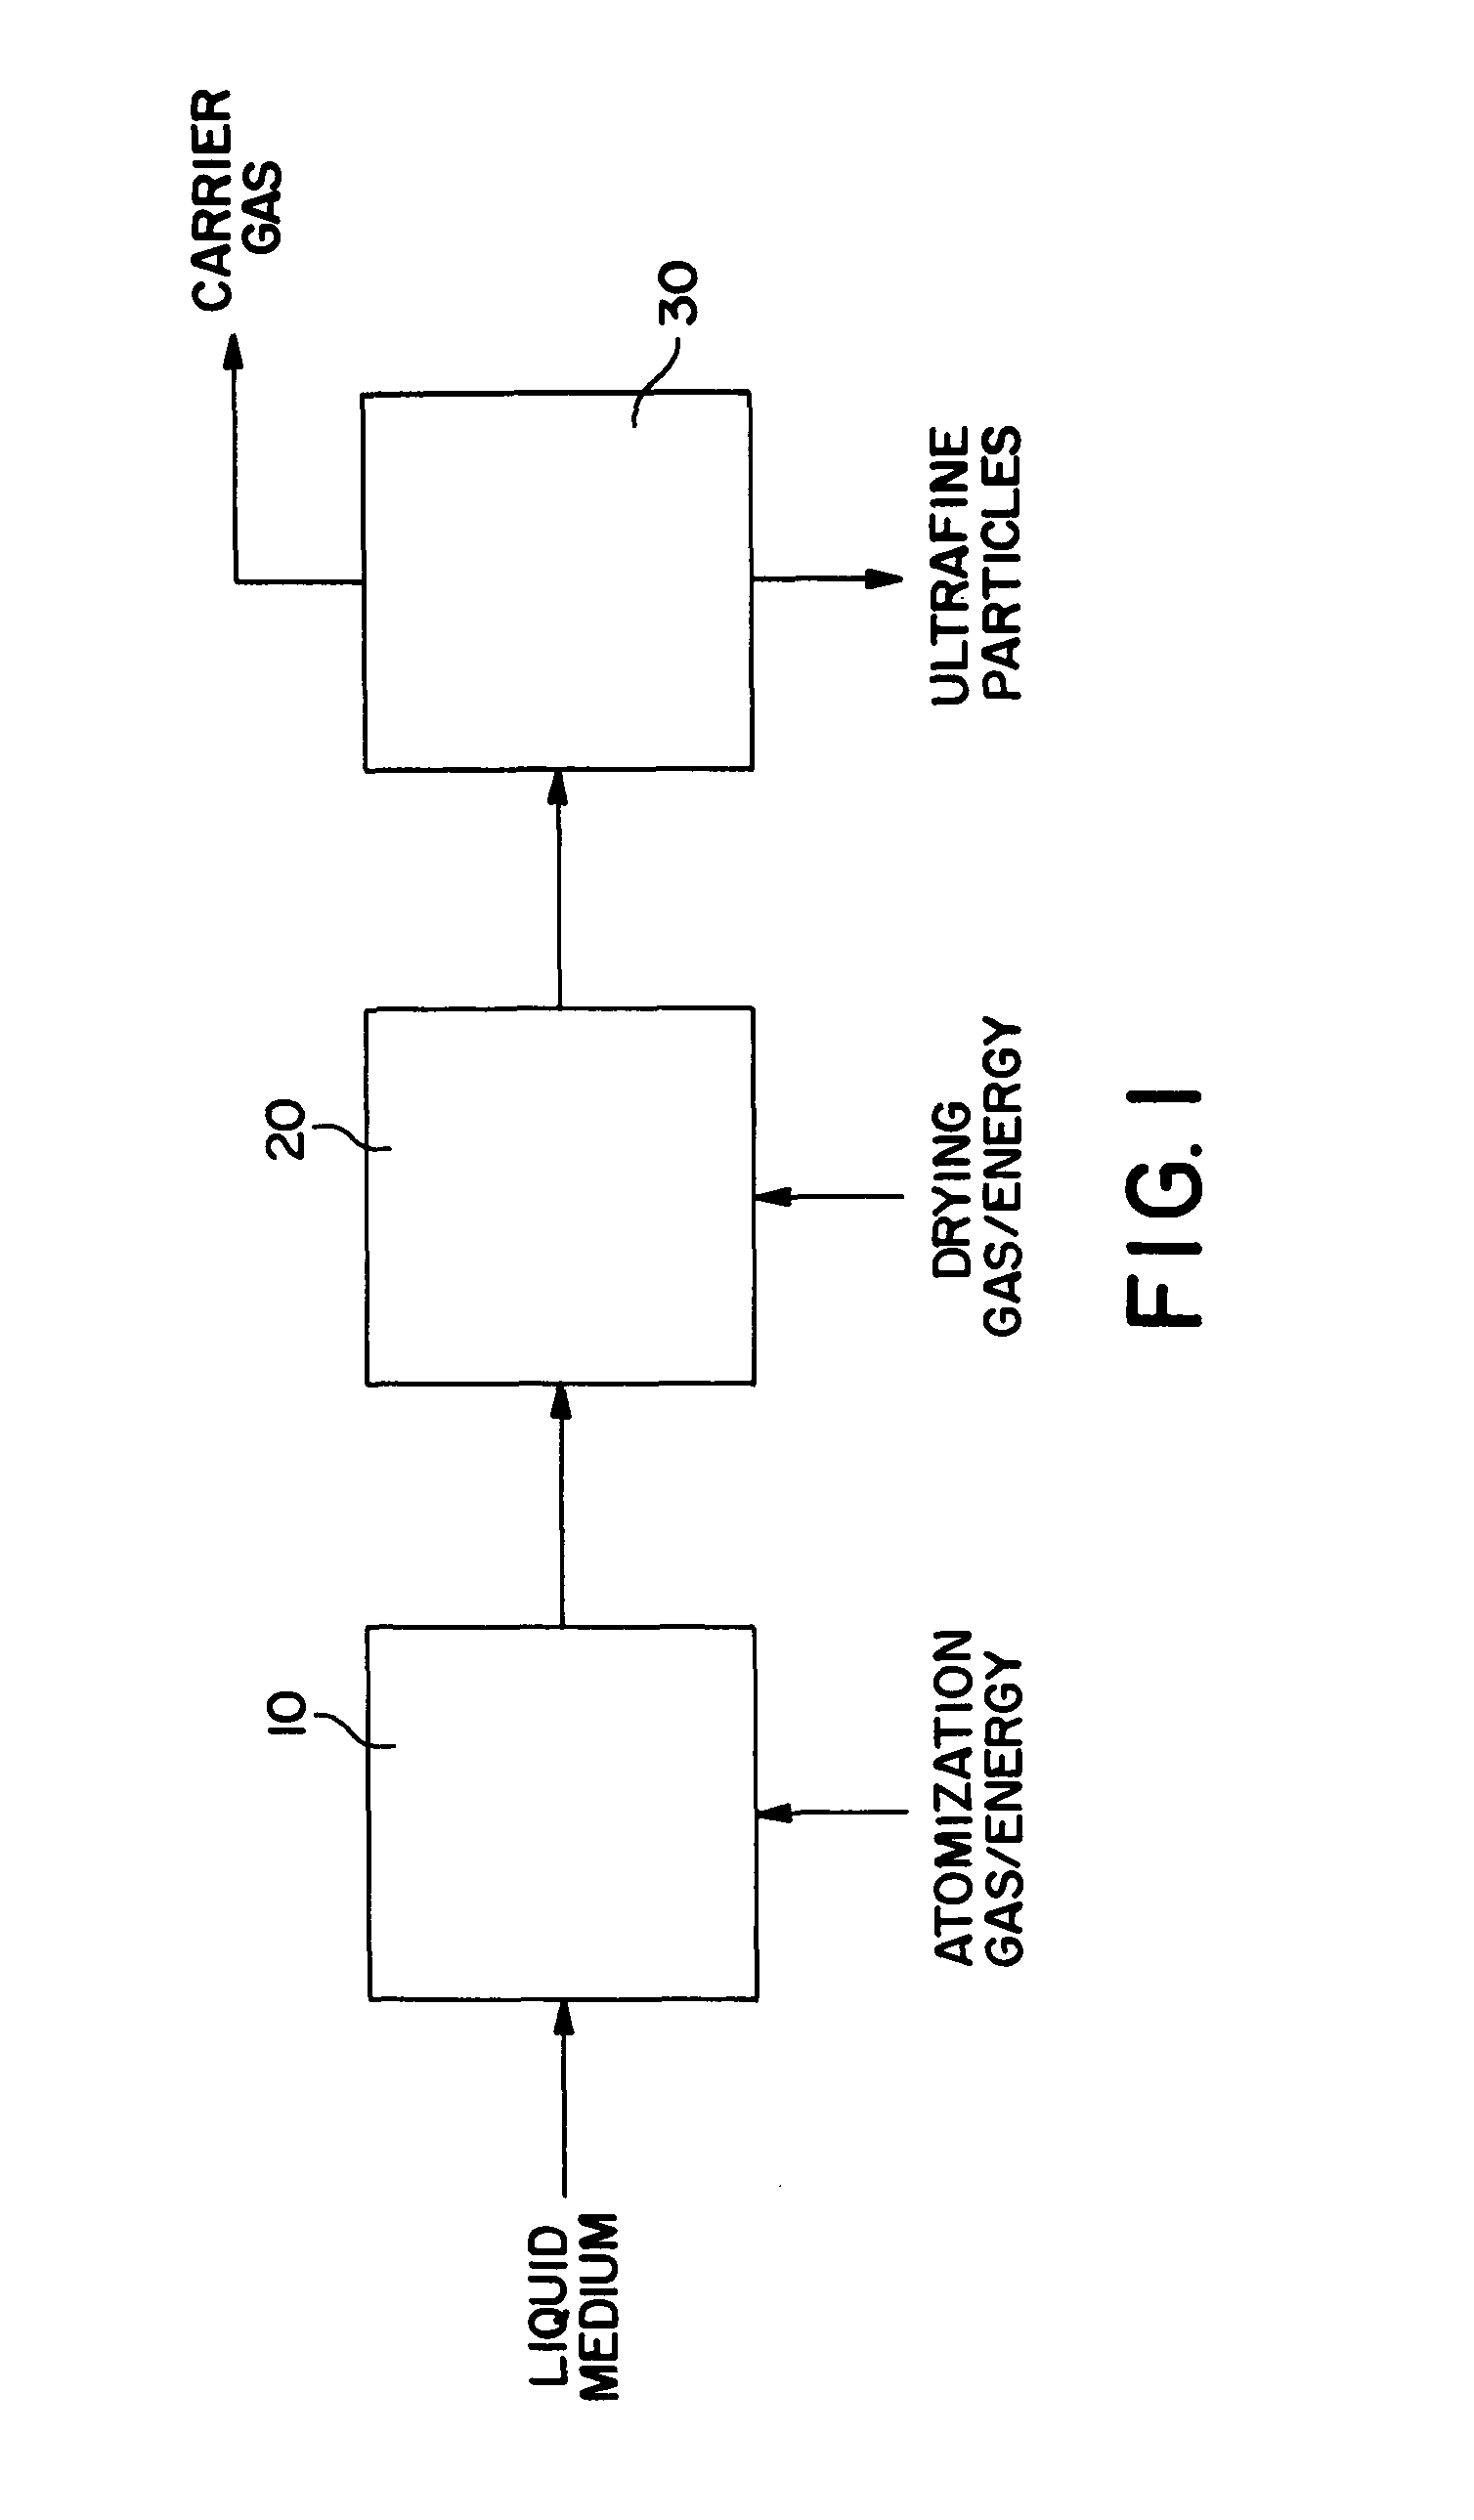 Spray drying methods and related compositions